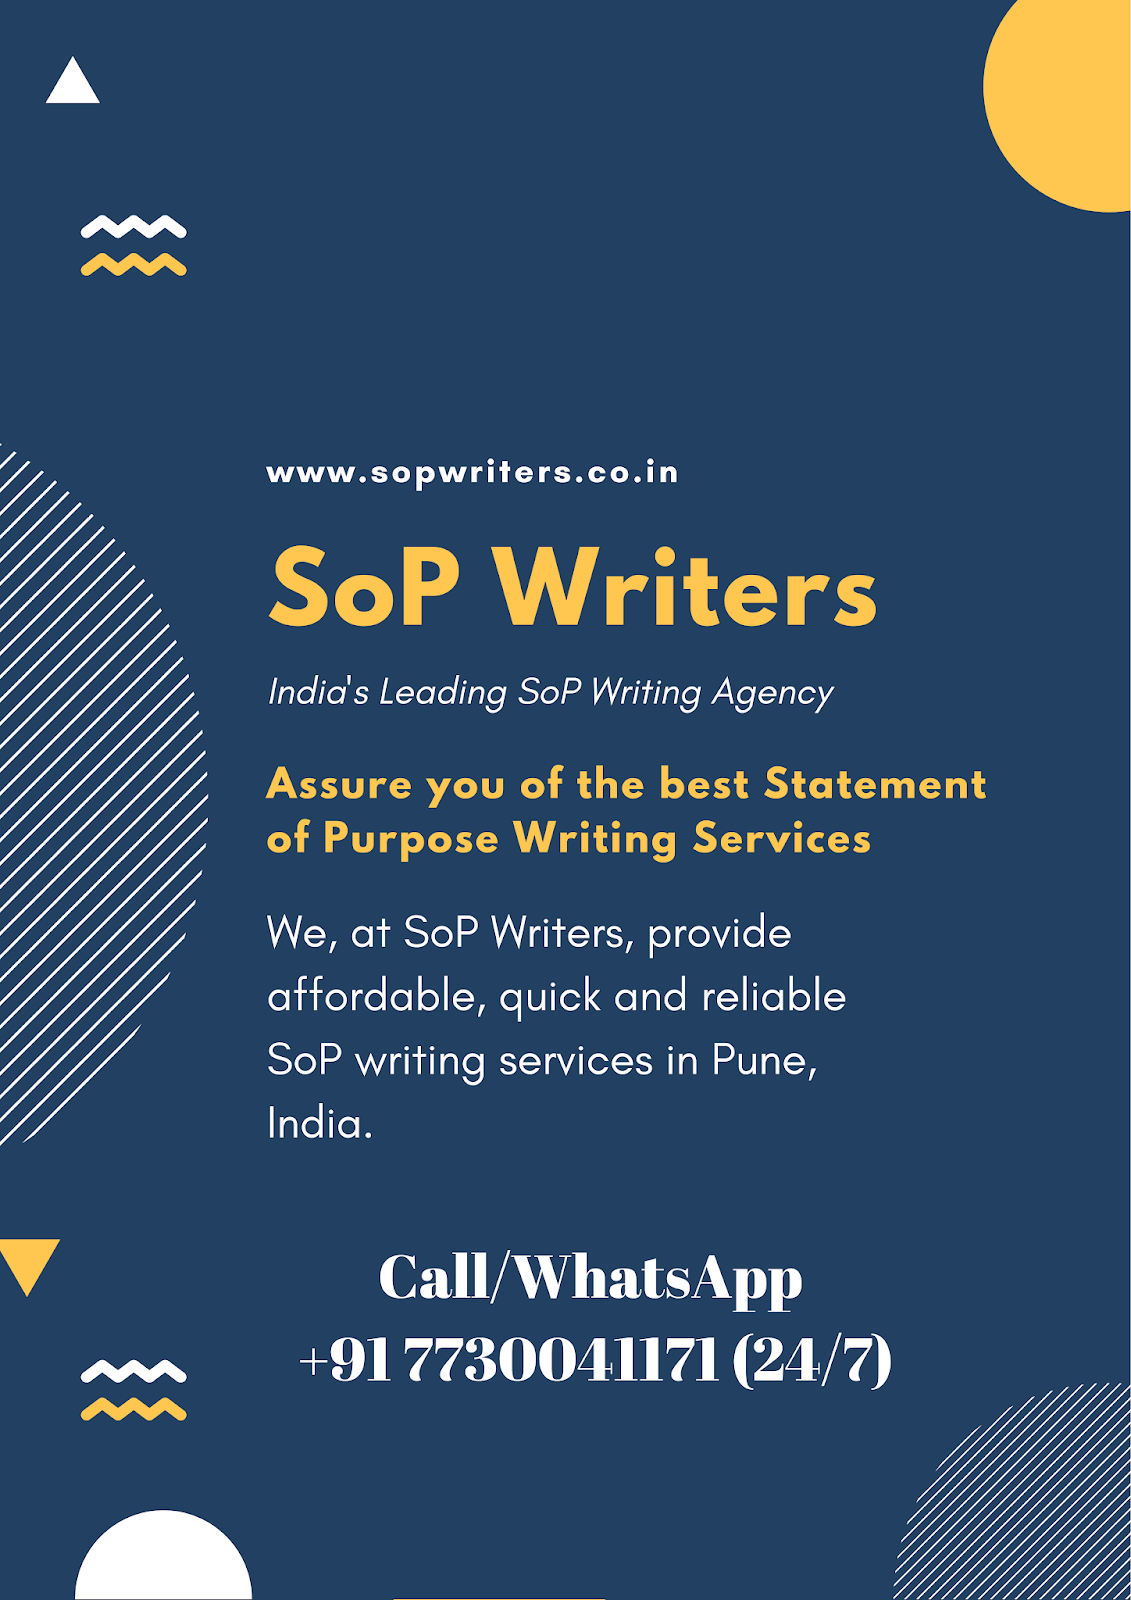 Sop writing services india